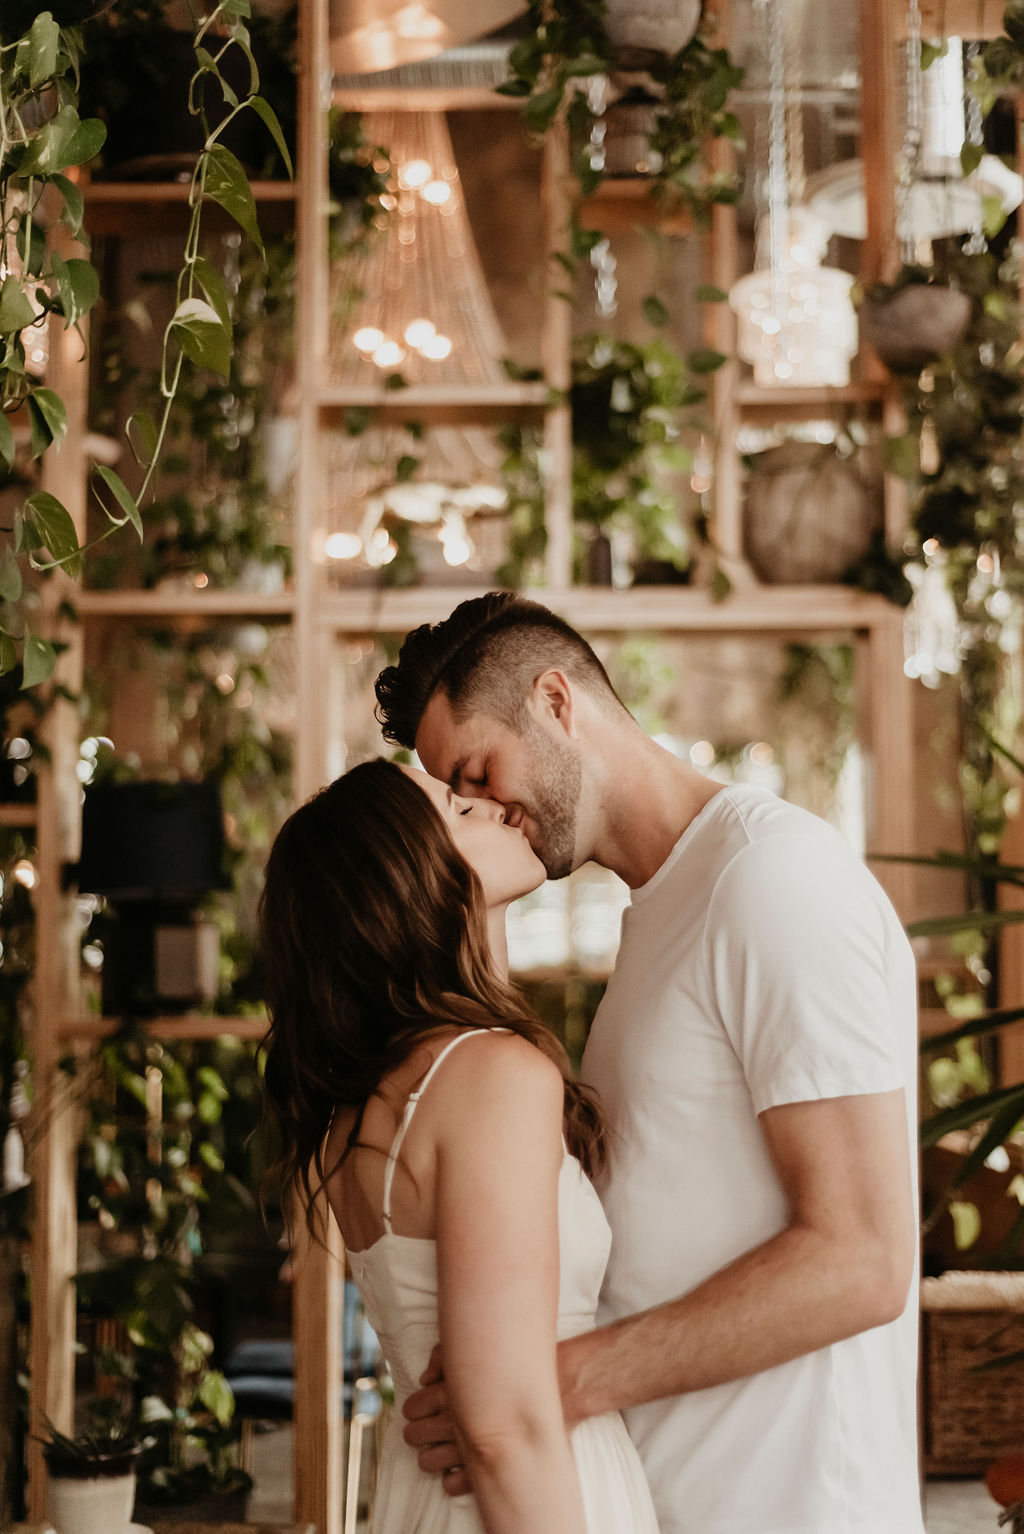 Romantic indoor engagement session at the Orchard resturaunt